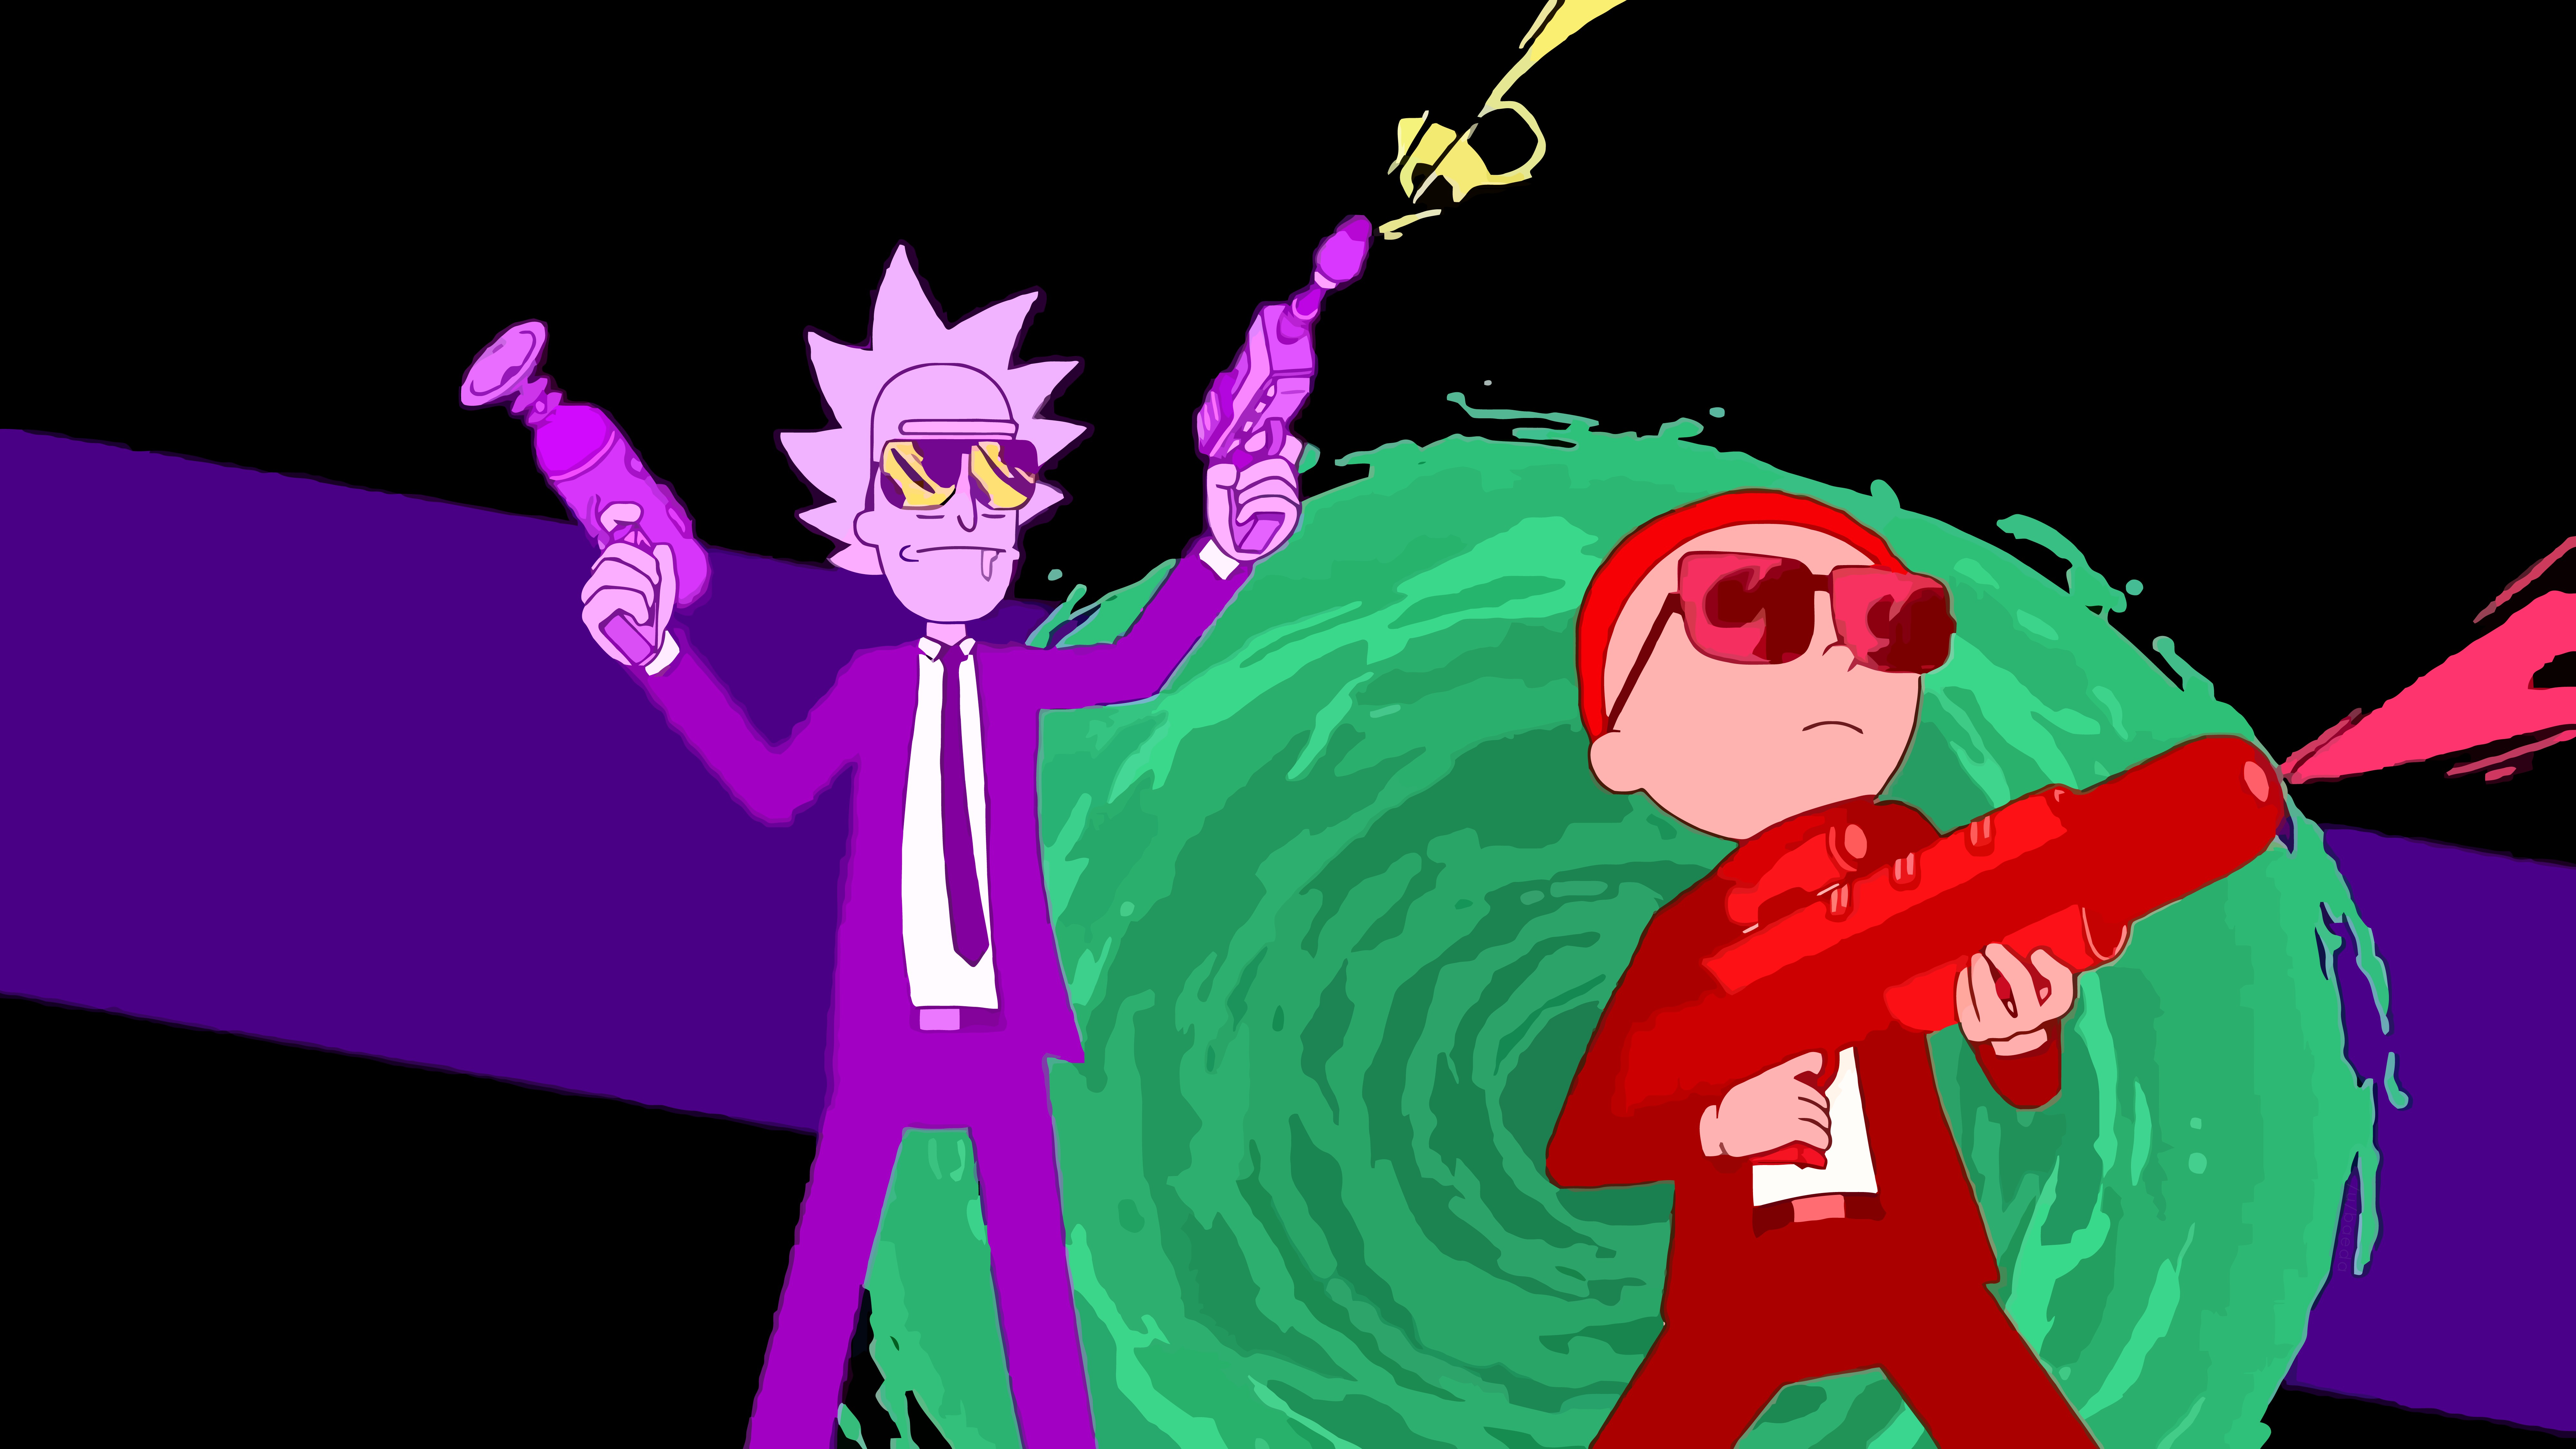 Rick and Morty, Run the Jewels, Vector graphics Wallpaper